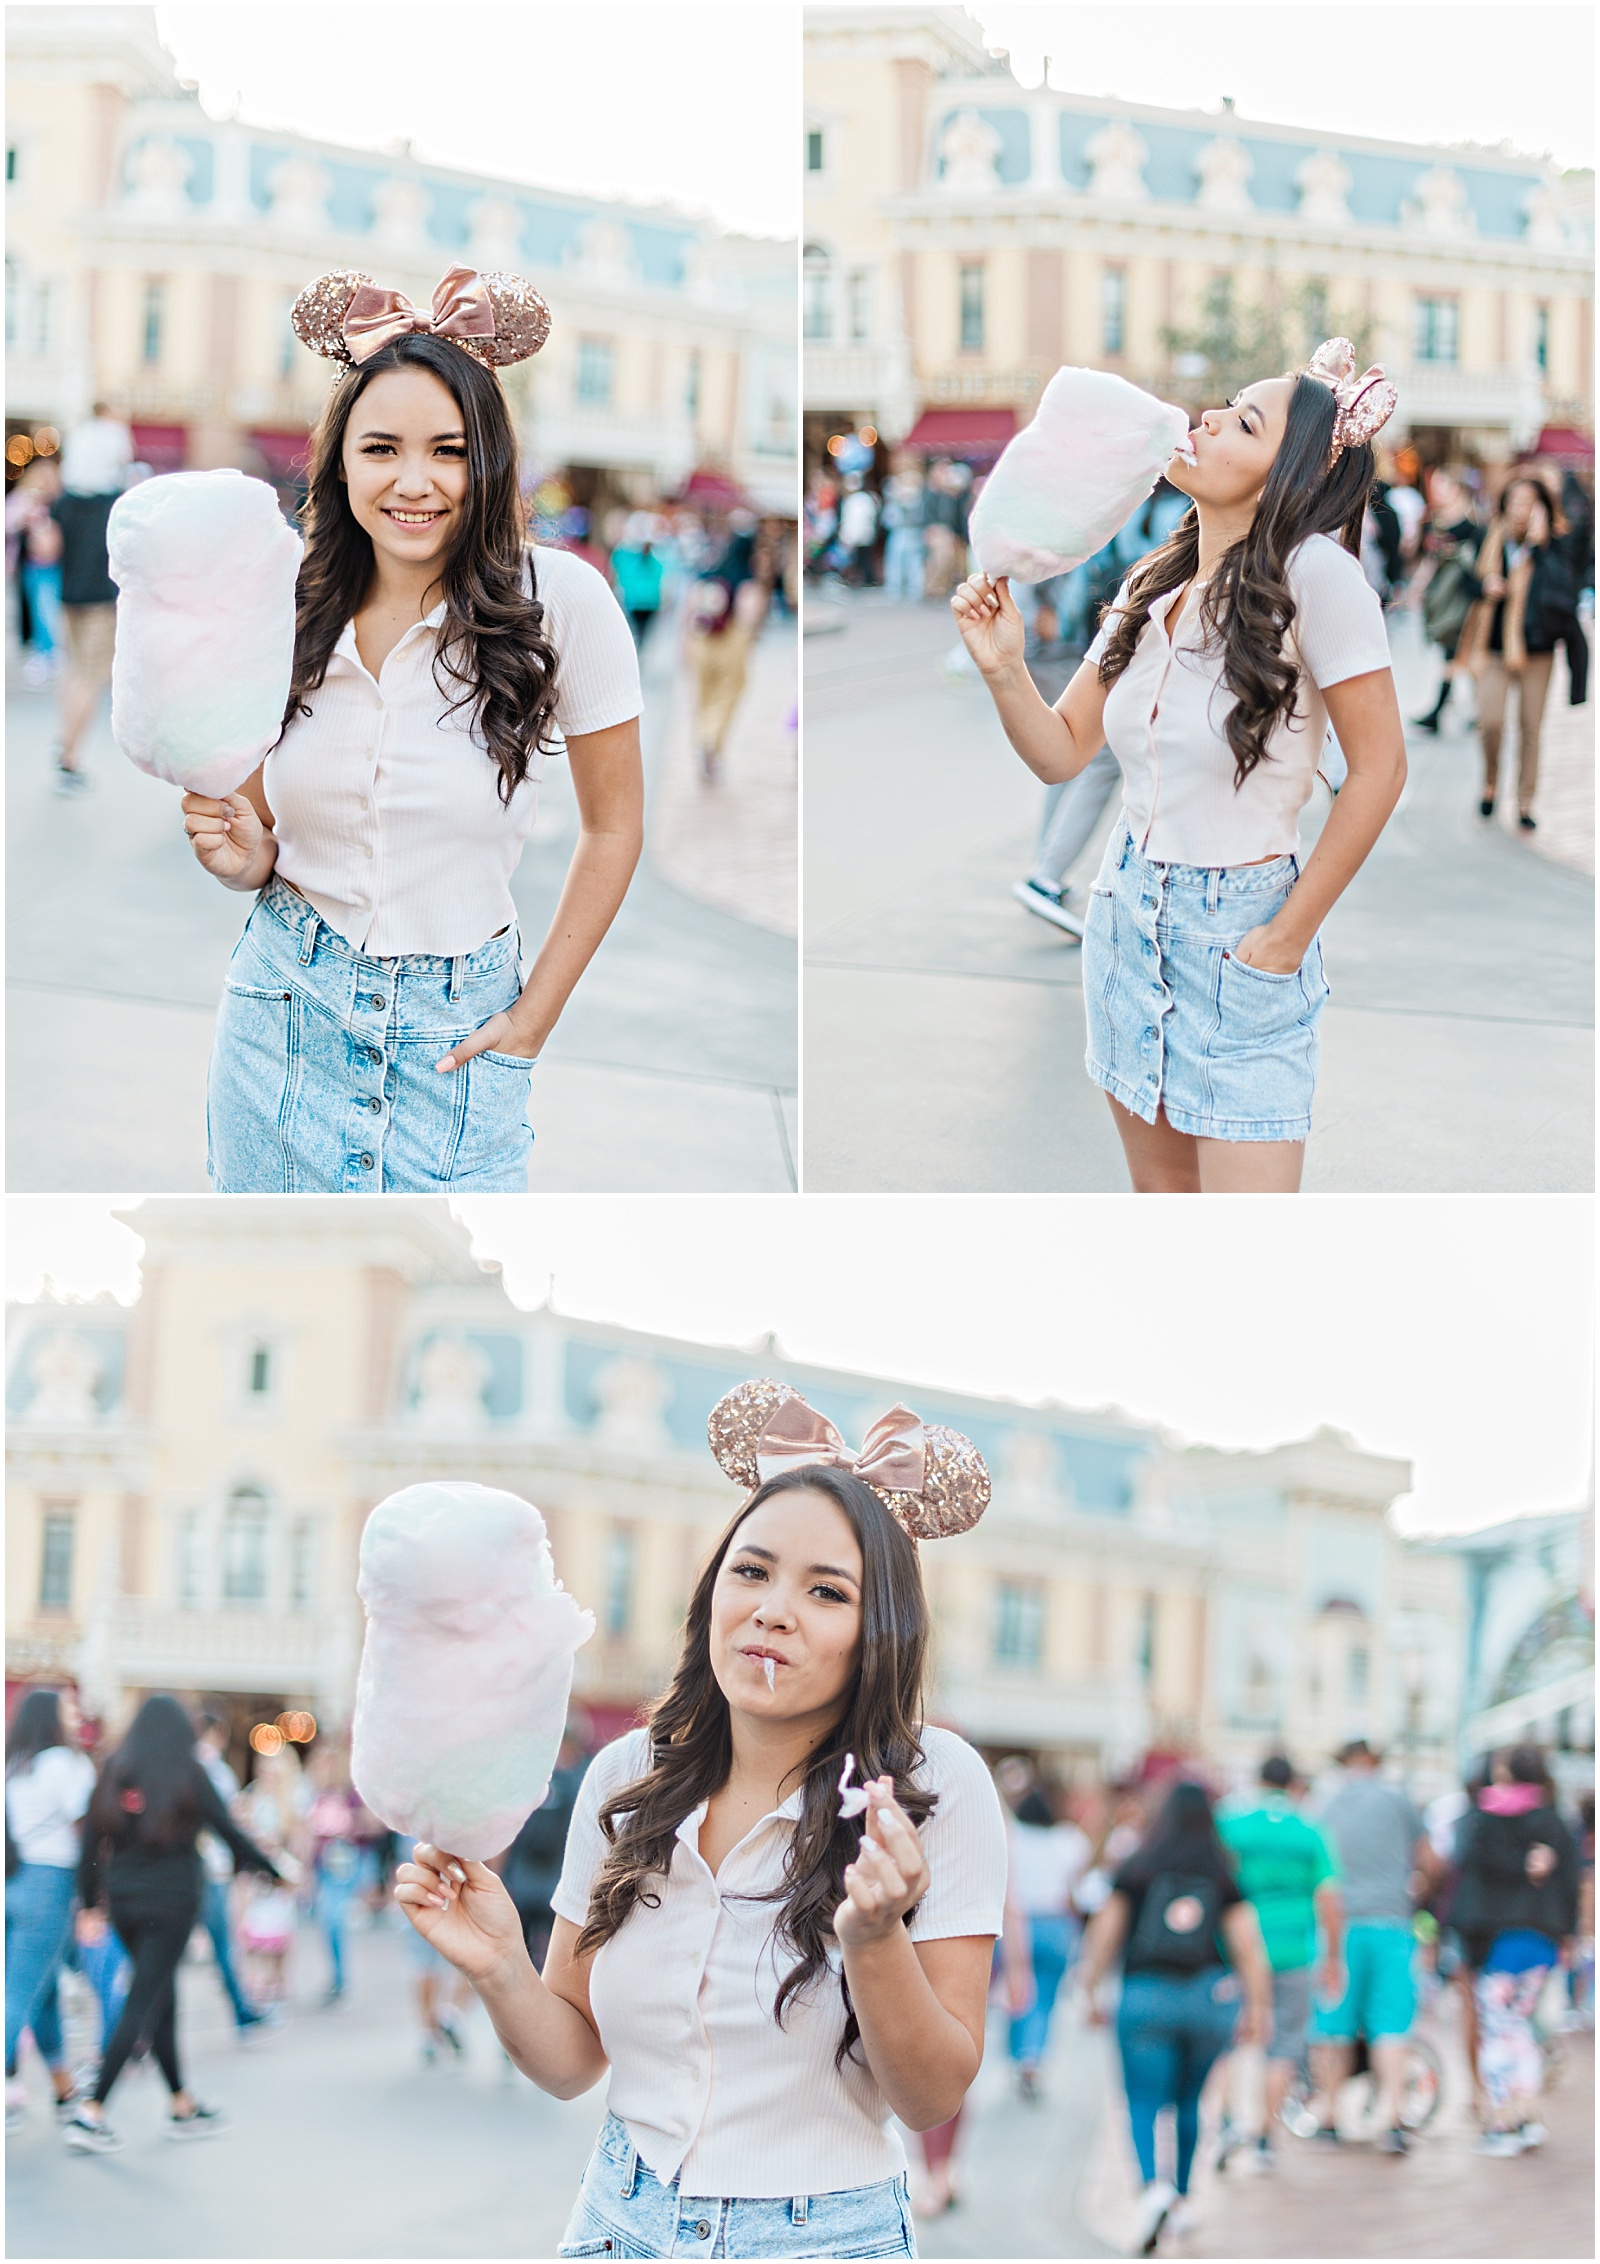 Disneyland Main Street Senior Session.  Images by Mollie Jane Photography. To see more go to www.molliejanephotography.com.